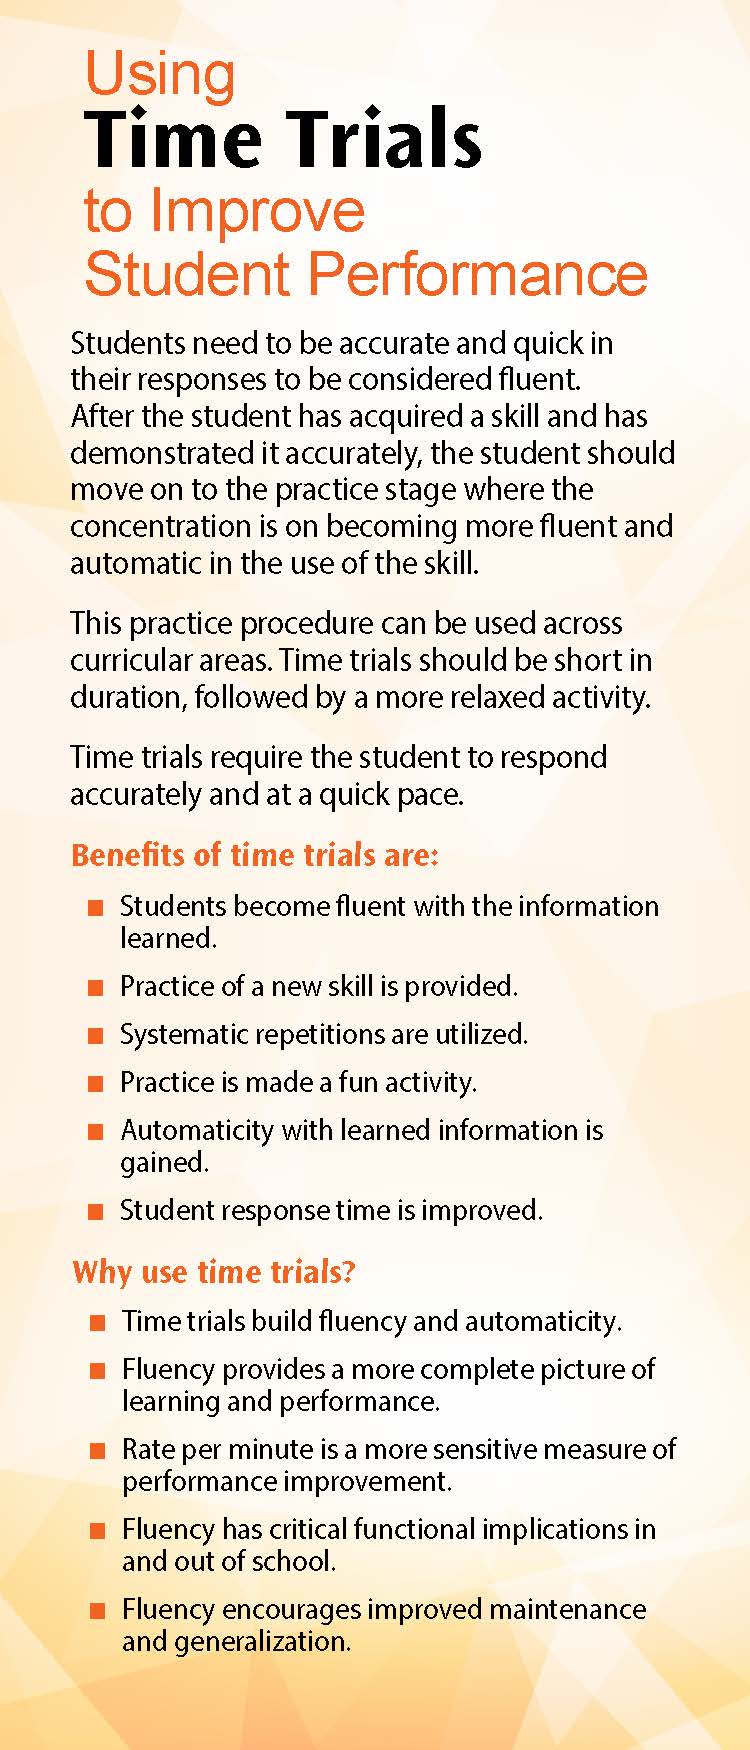 Using Time Trials to Improve Student Performance